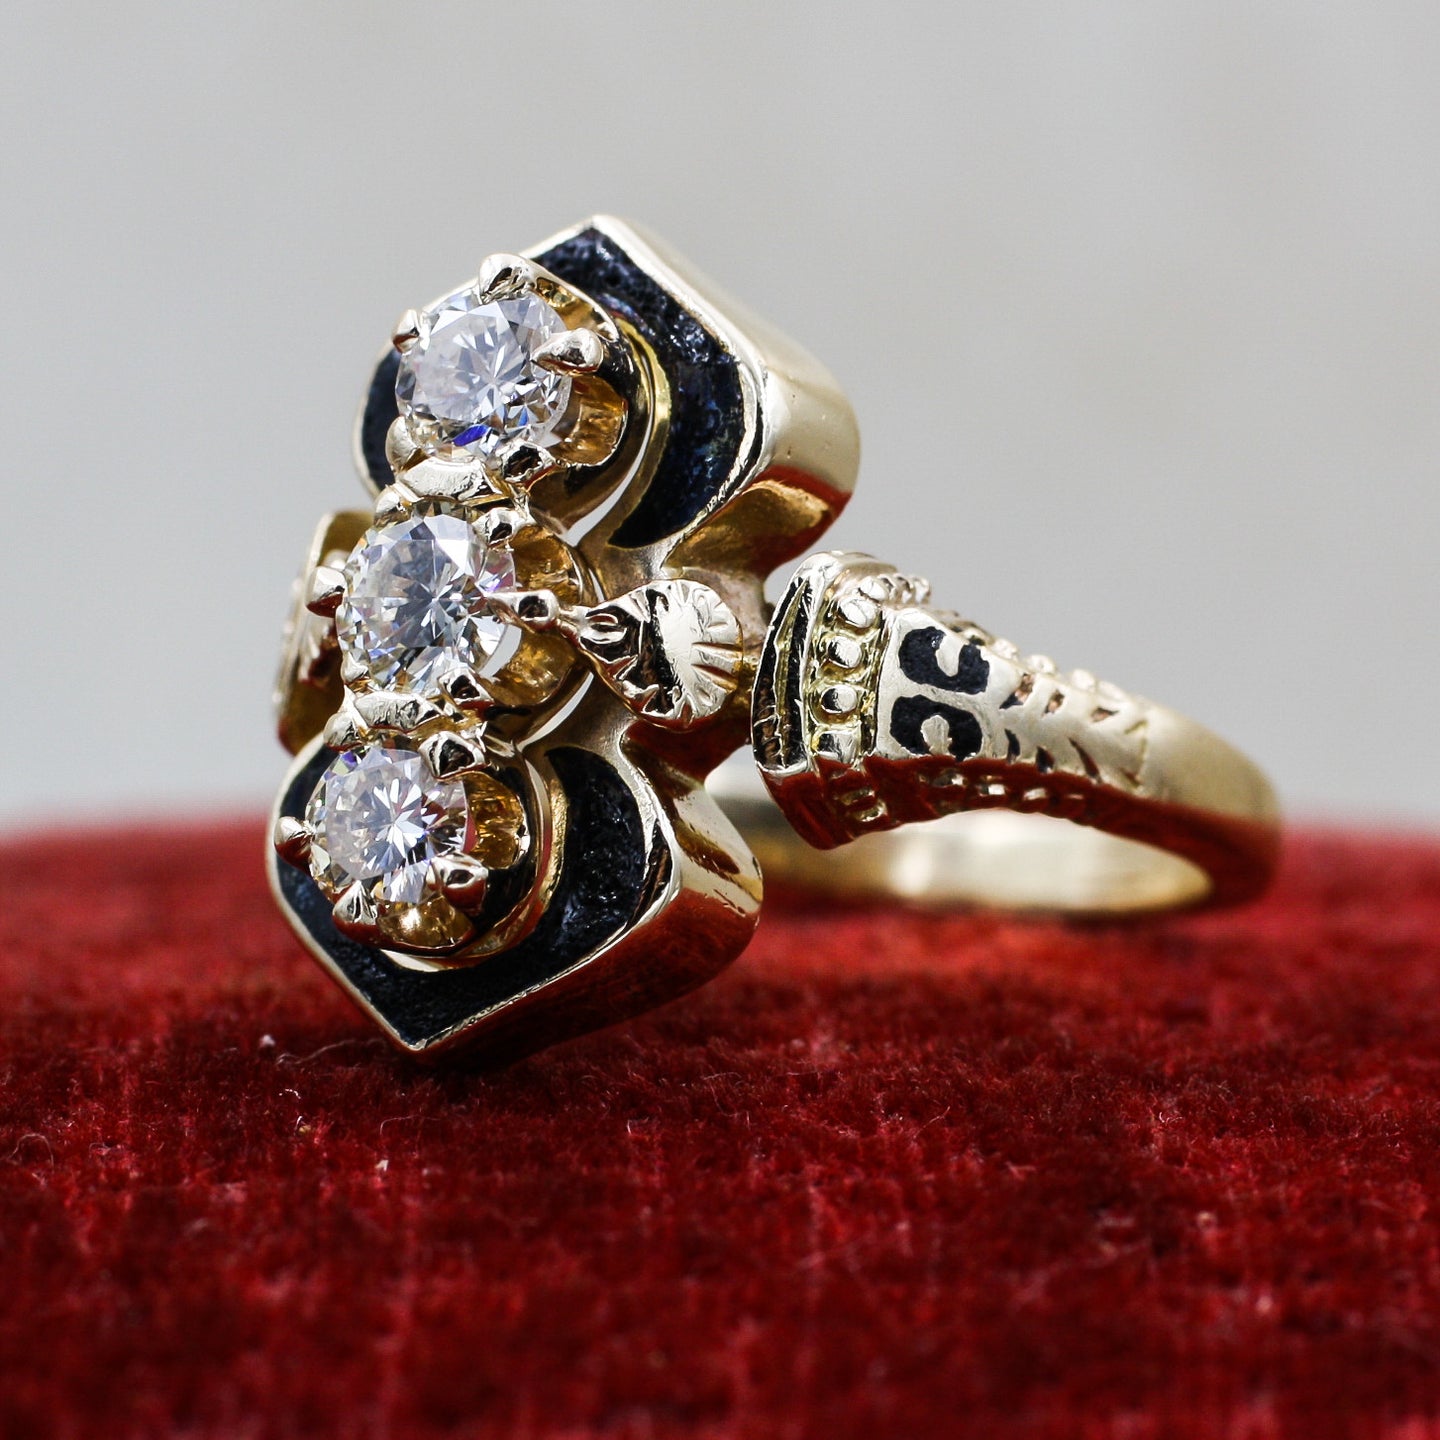 1930s-50s Victorian Reproduction Enamel and Diamond Ring- Shoulder View